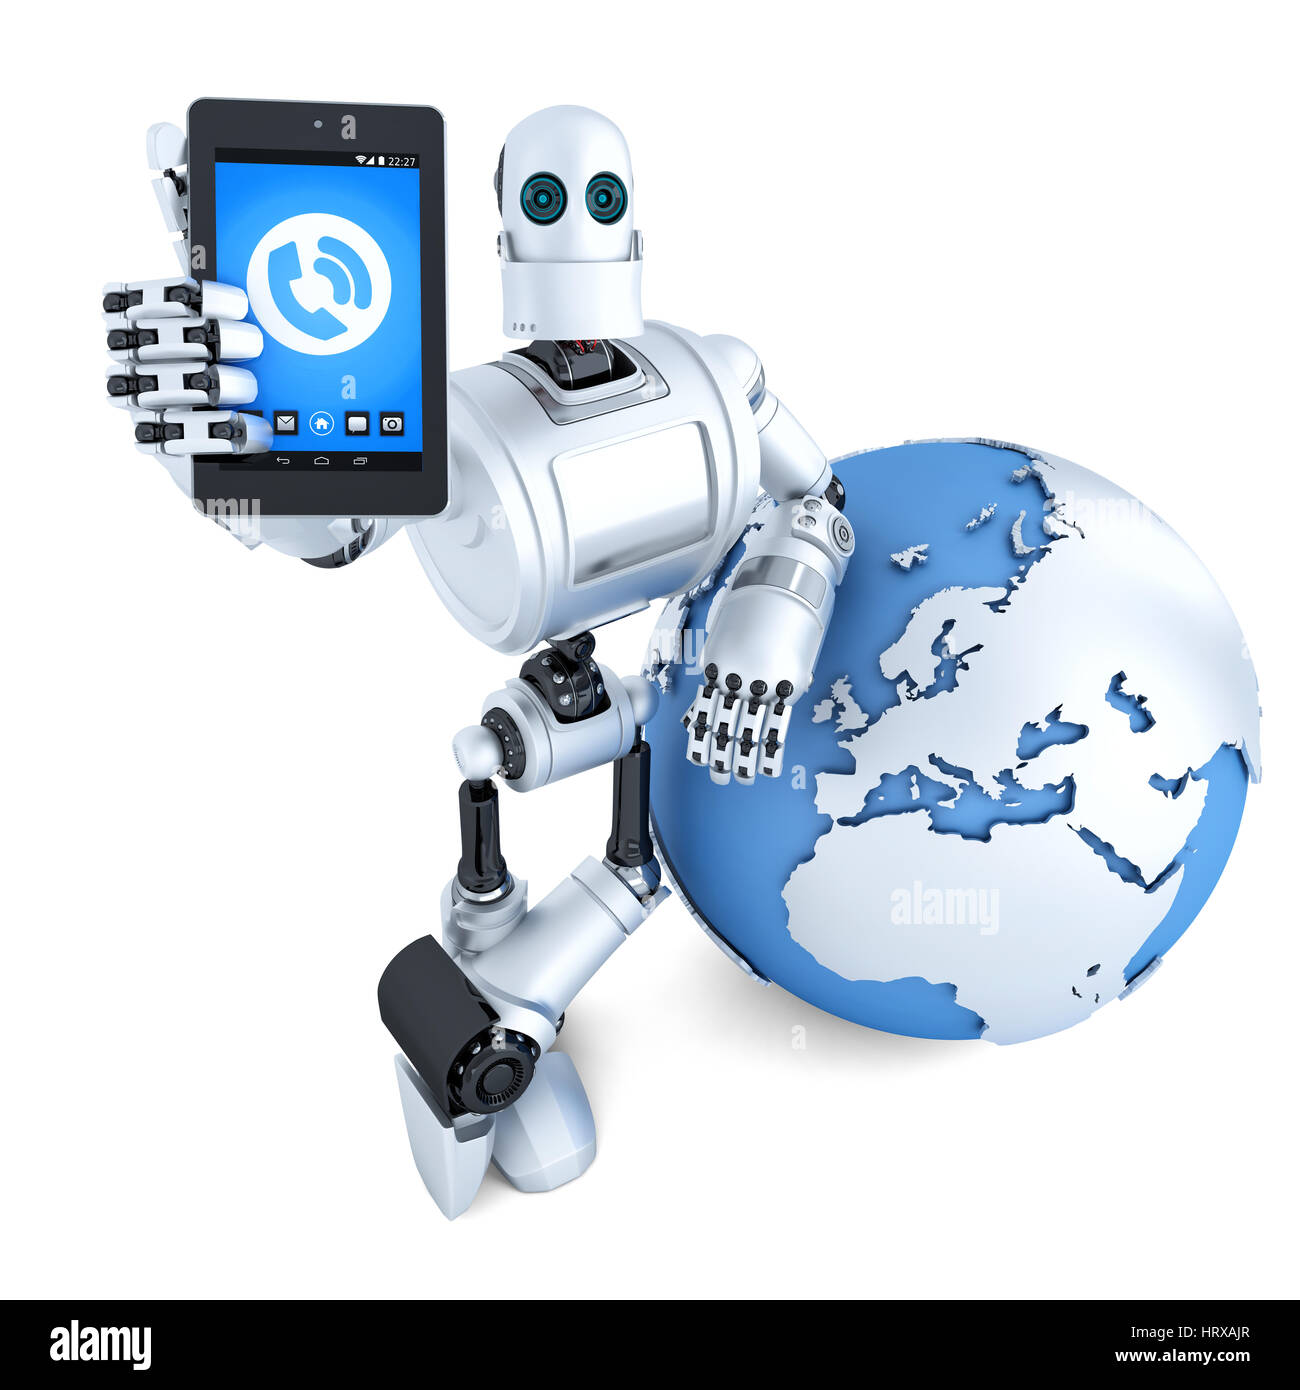 Robot with tablet phone and earth globe. Global communication concept. Isolated over white. Contains clipping path Stock Photo